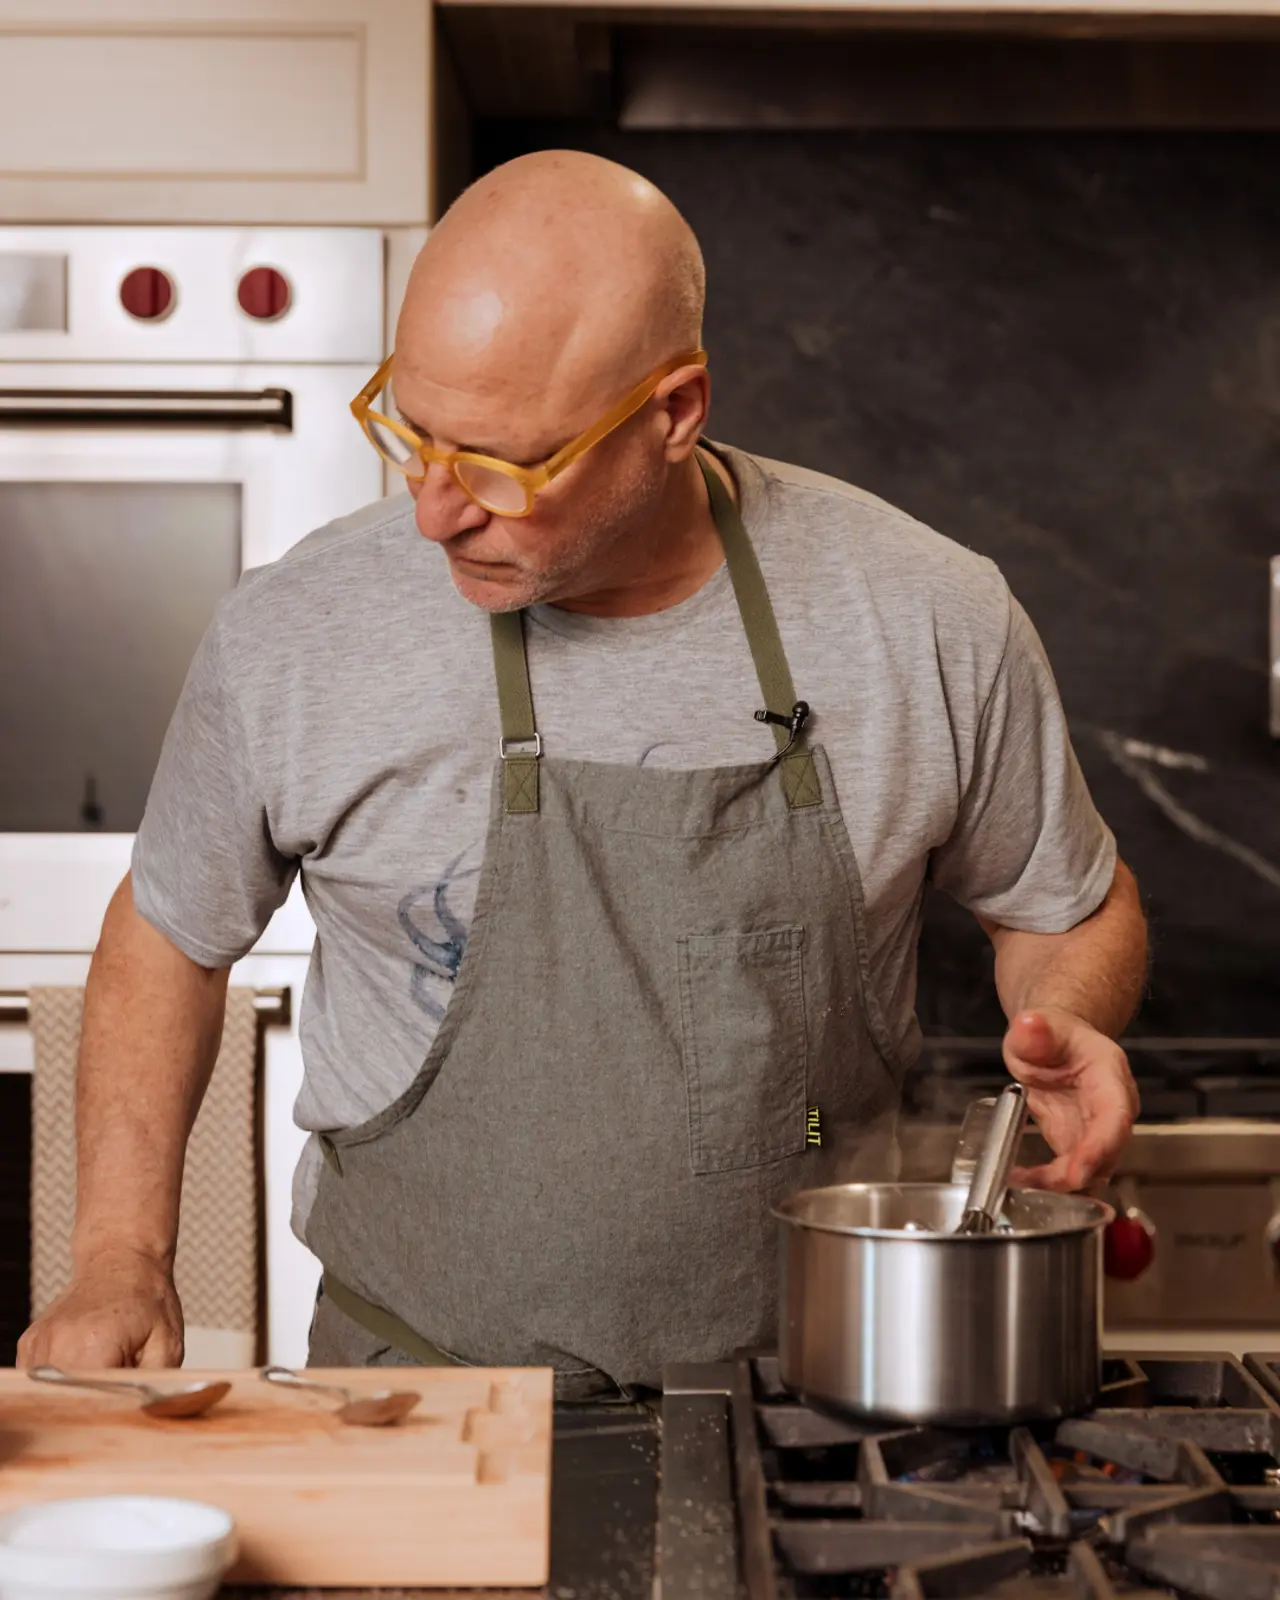 A bald man wearing eyeglasses and an apron stirs a pot on the stove while concentrating on his cooking.